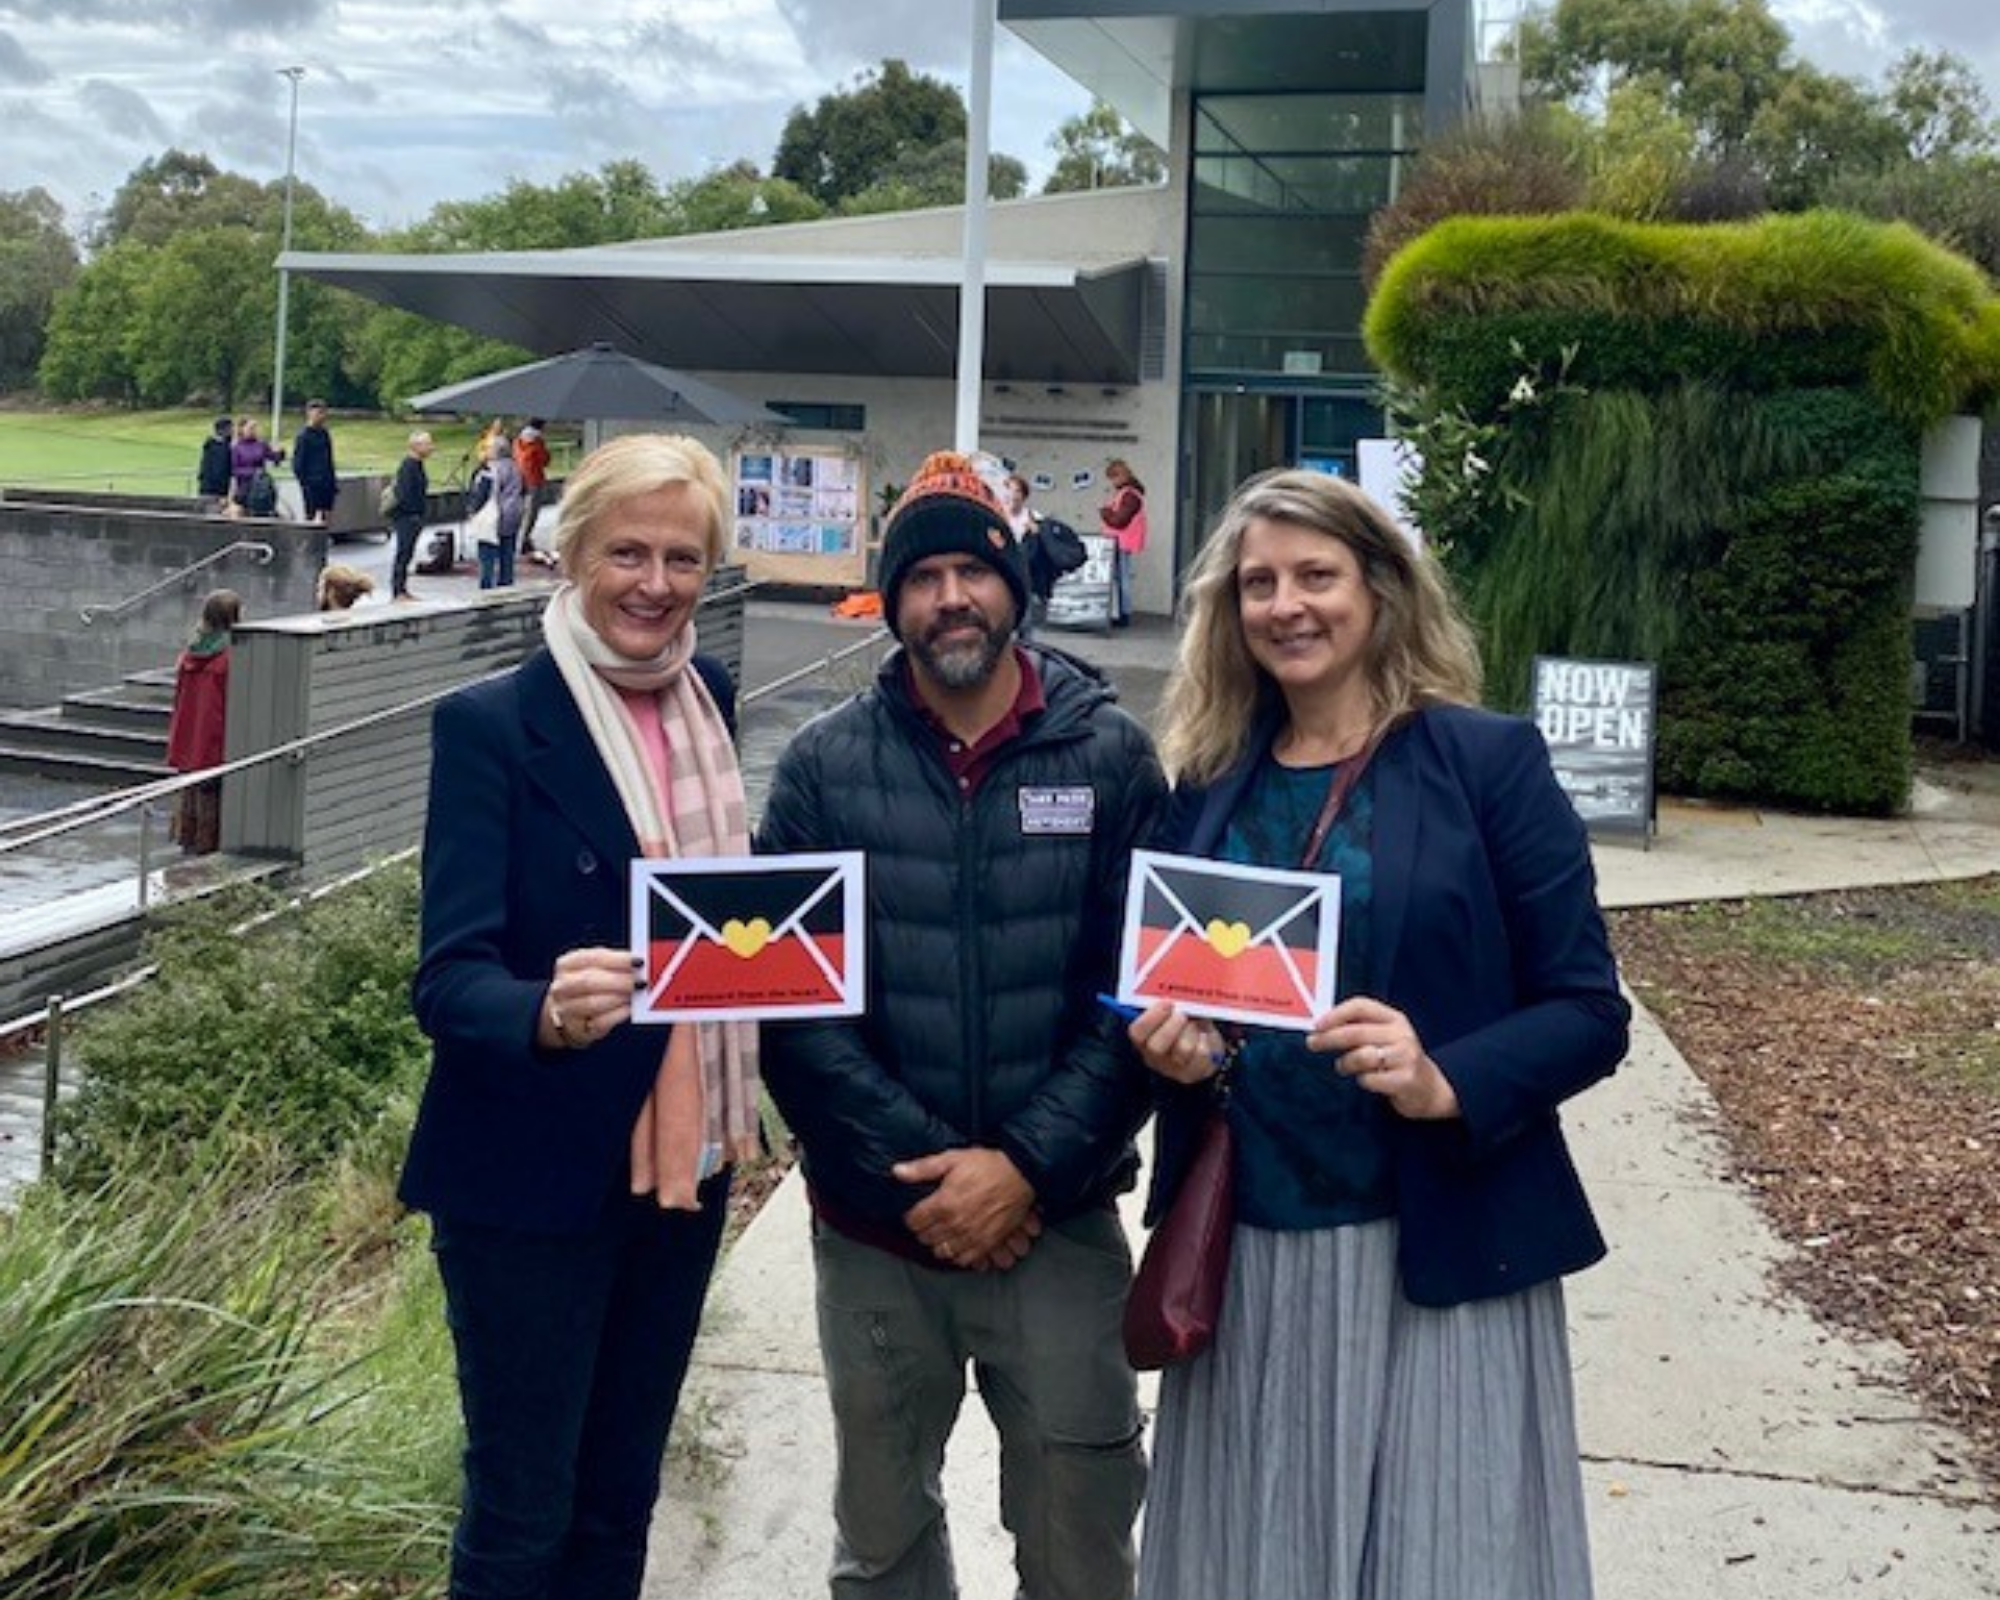 (L-R) Federal Liberal MP Dr Katie Allen, David Tournier of the Boon Wurrung Foundation, and OUR project manager Sarah Naarden. 

